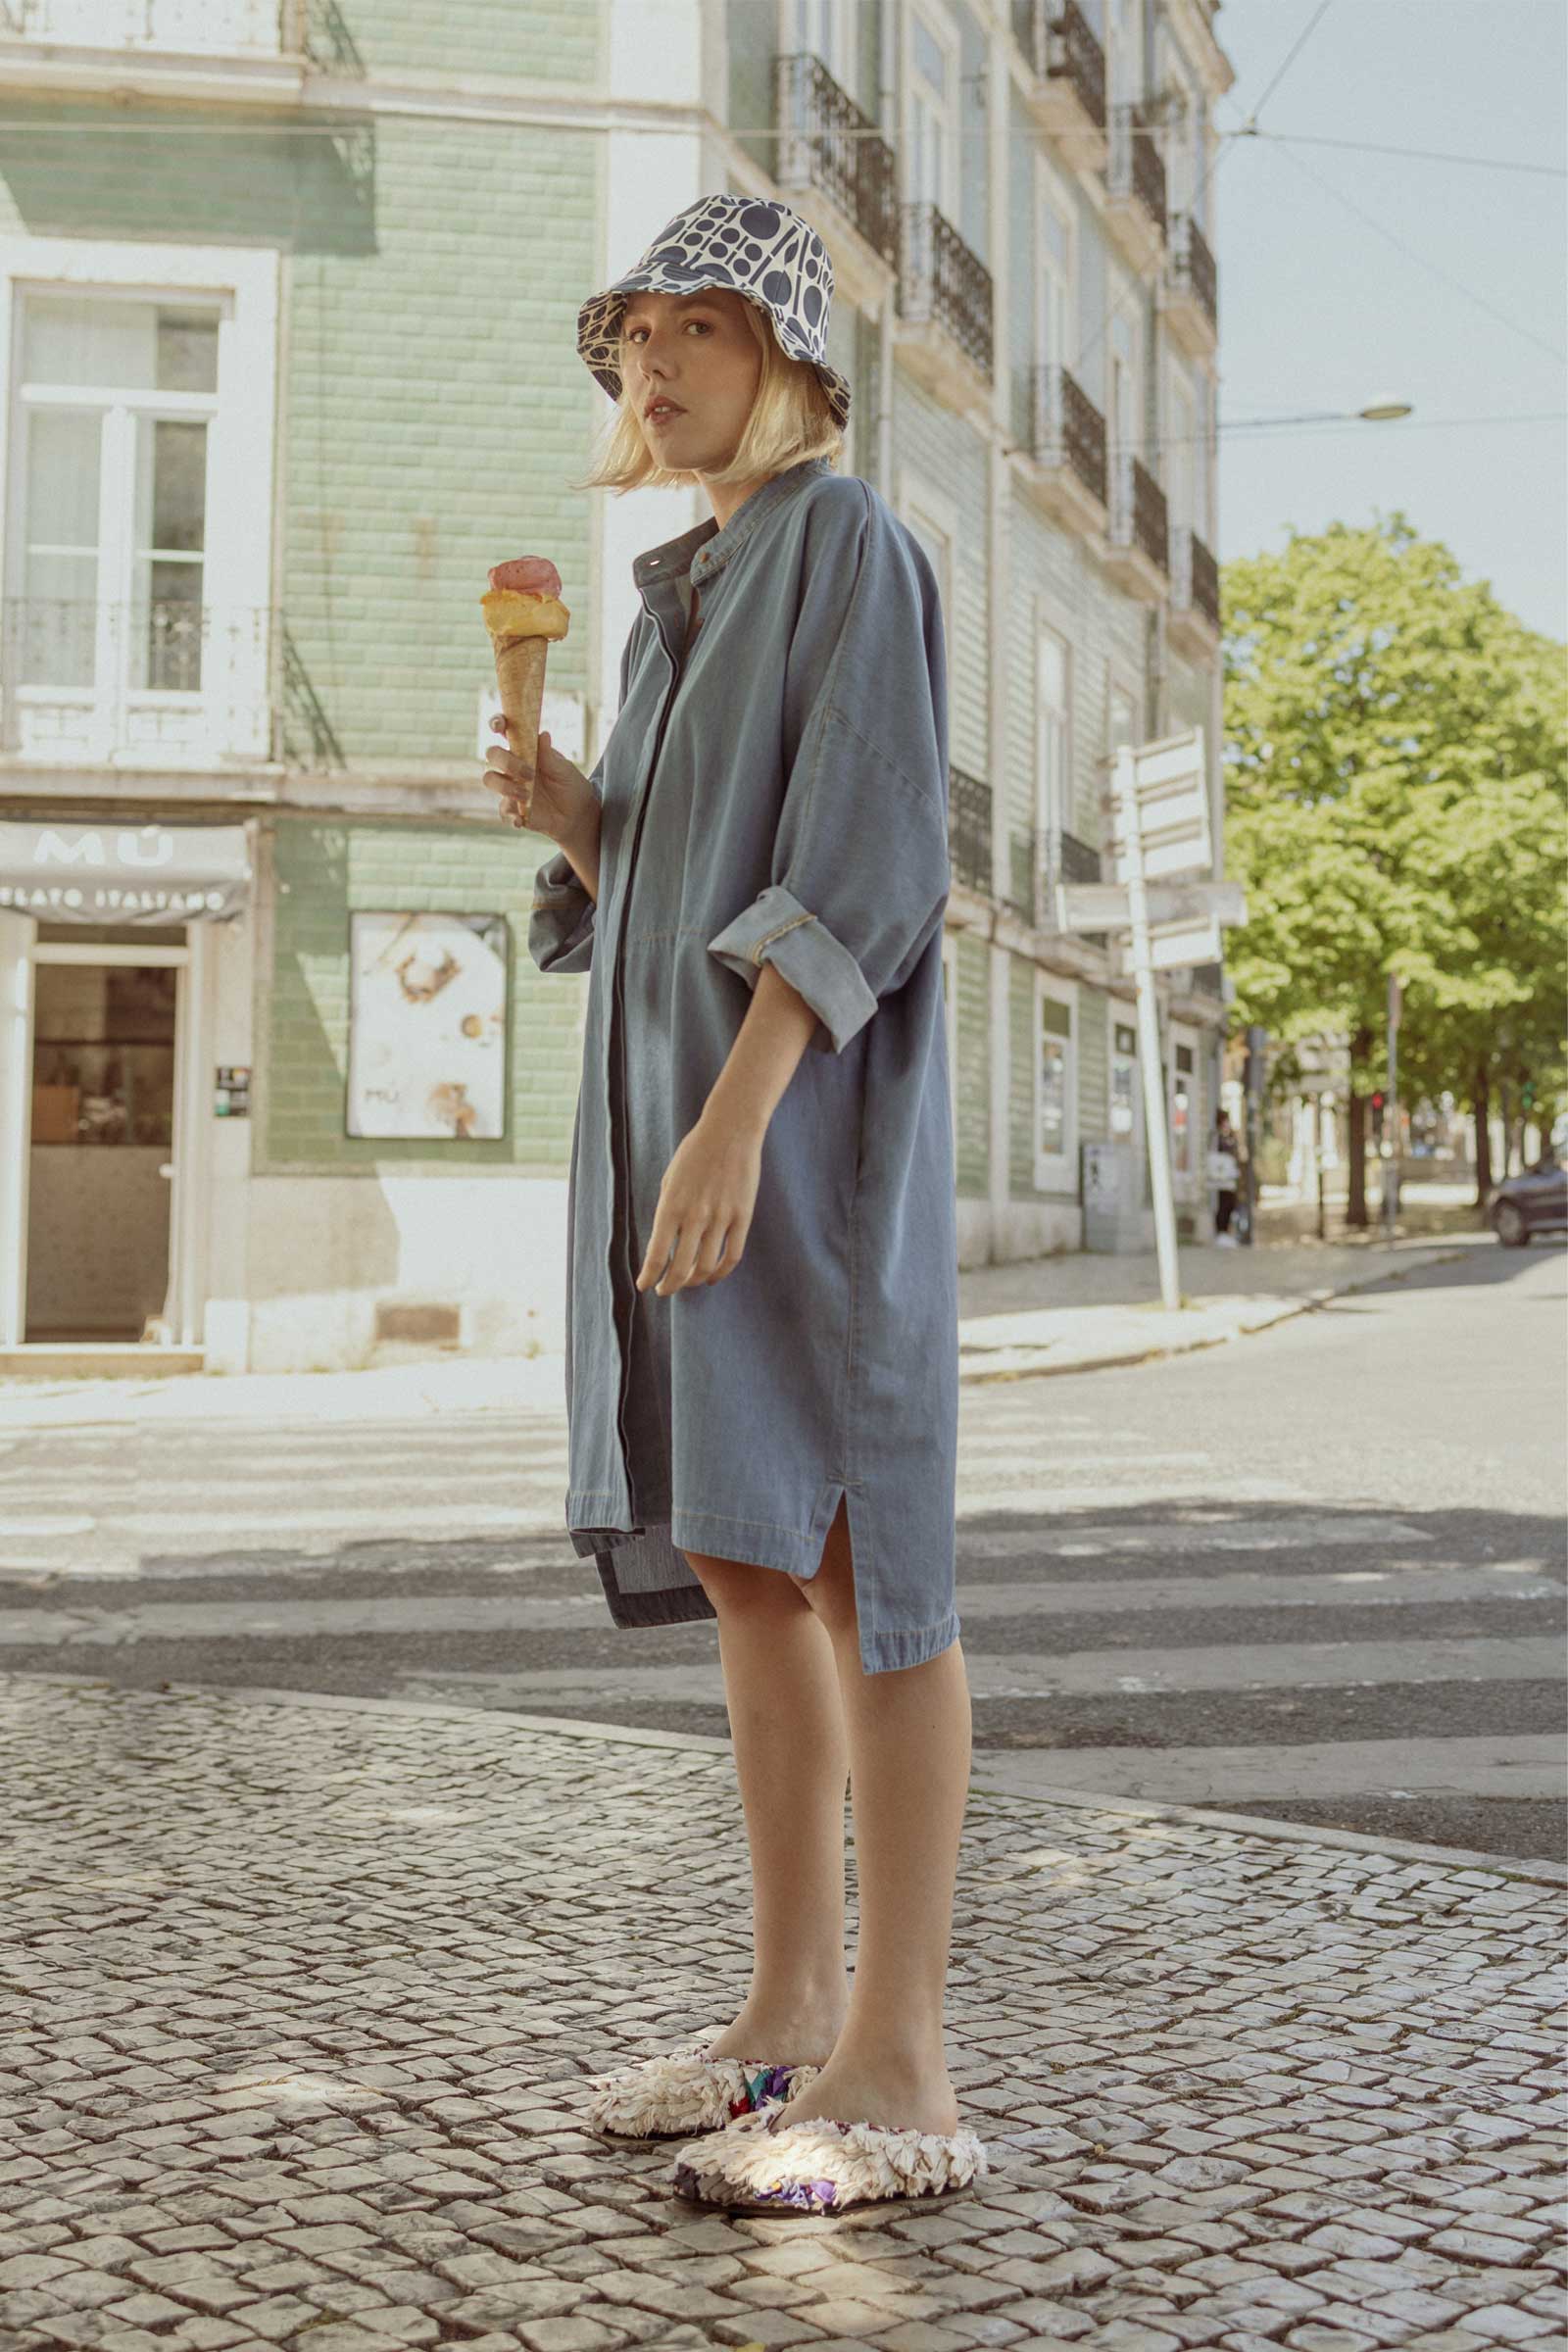 Model having ice cream and wearing a 10 to 10 denim shirt dress and hat